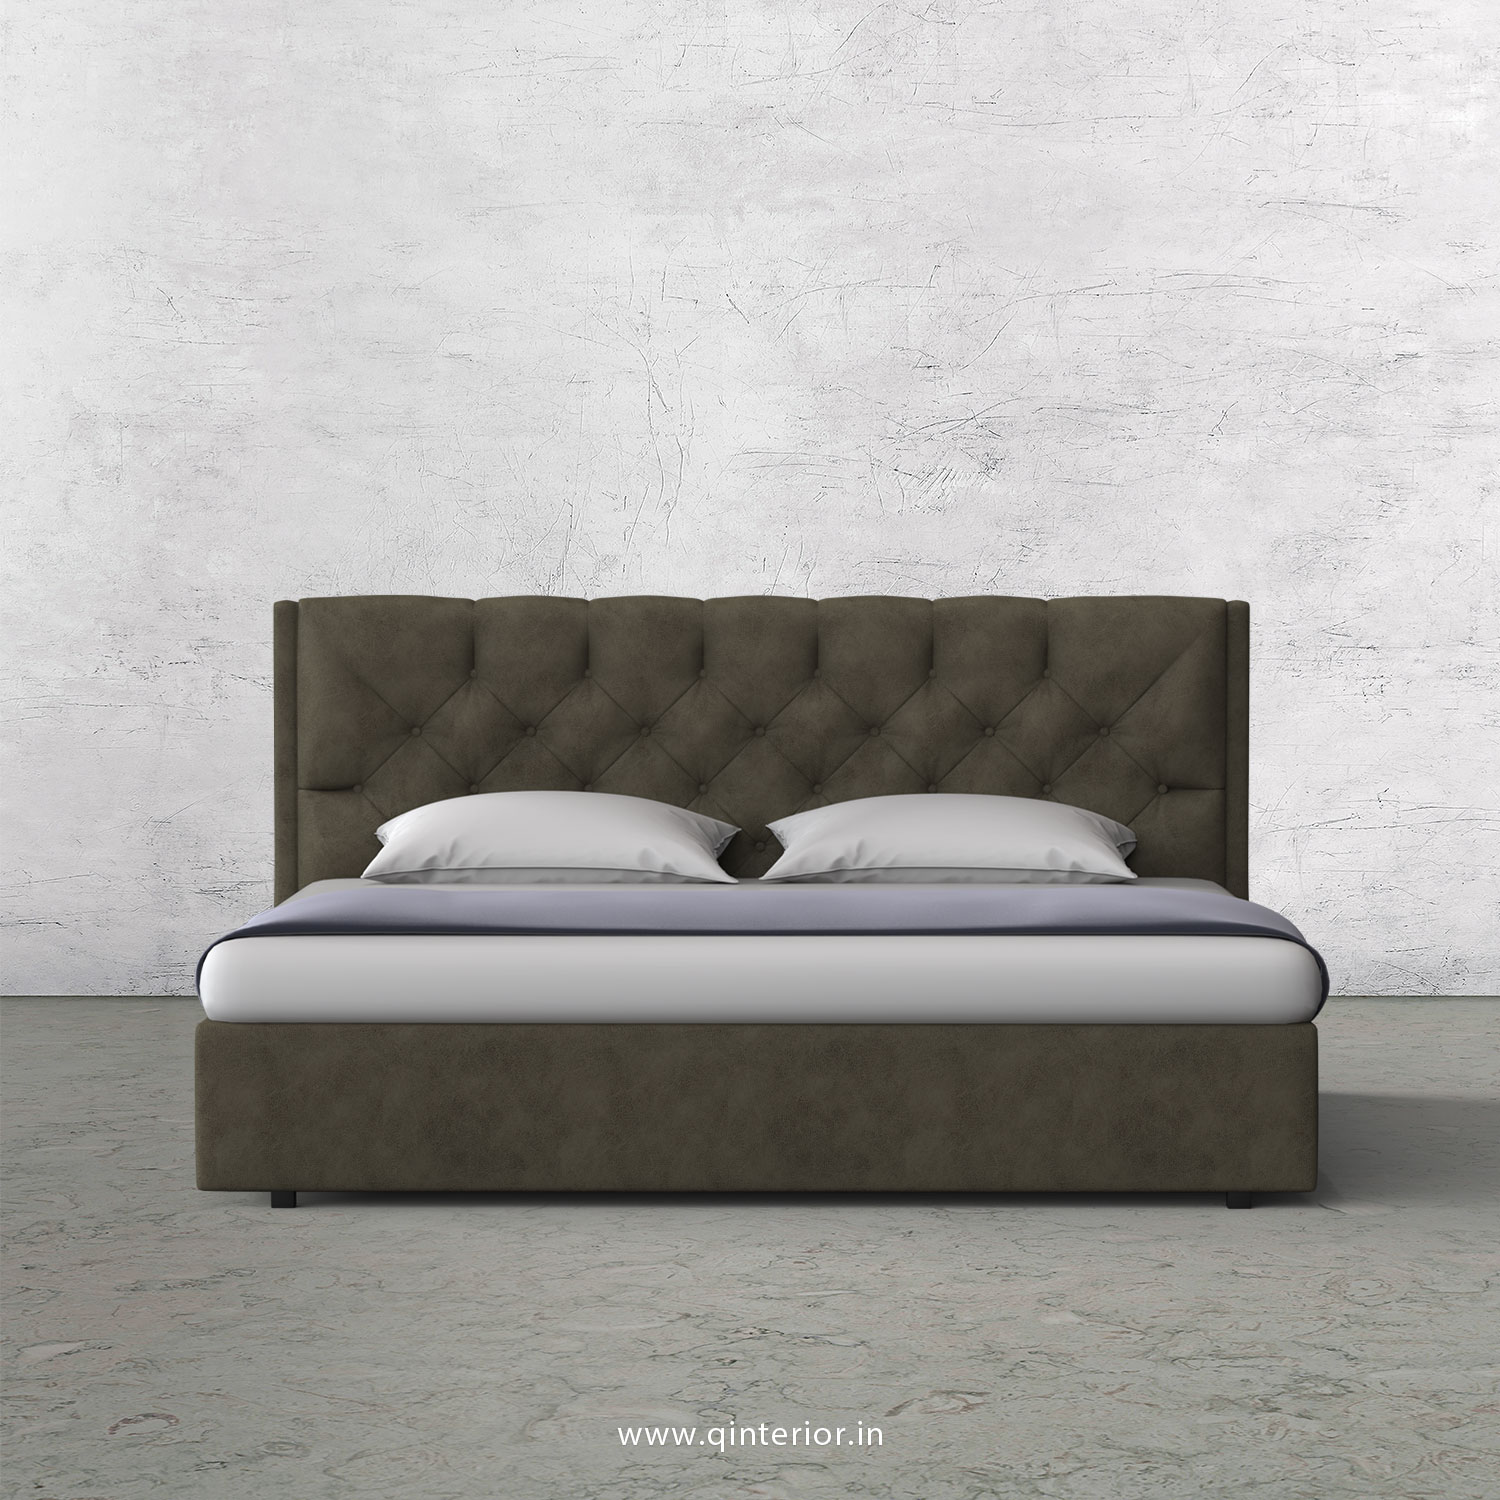 Scorpius Queen Bed in Fab Leather Fabric - QBD009 FL03